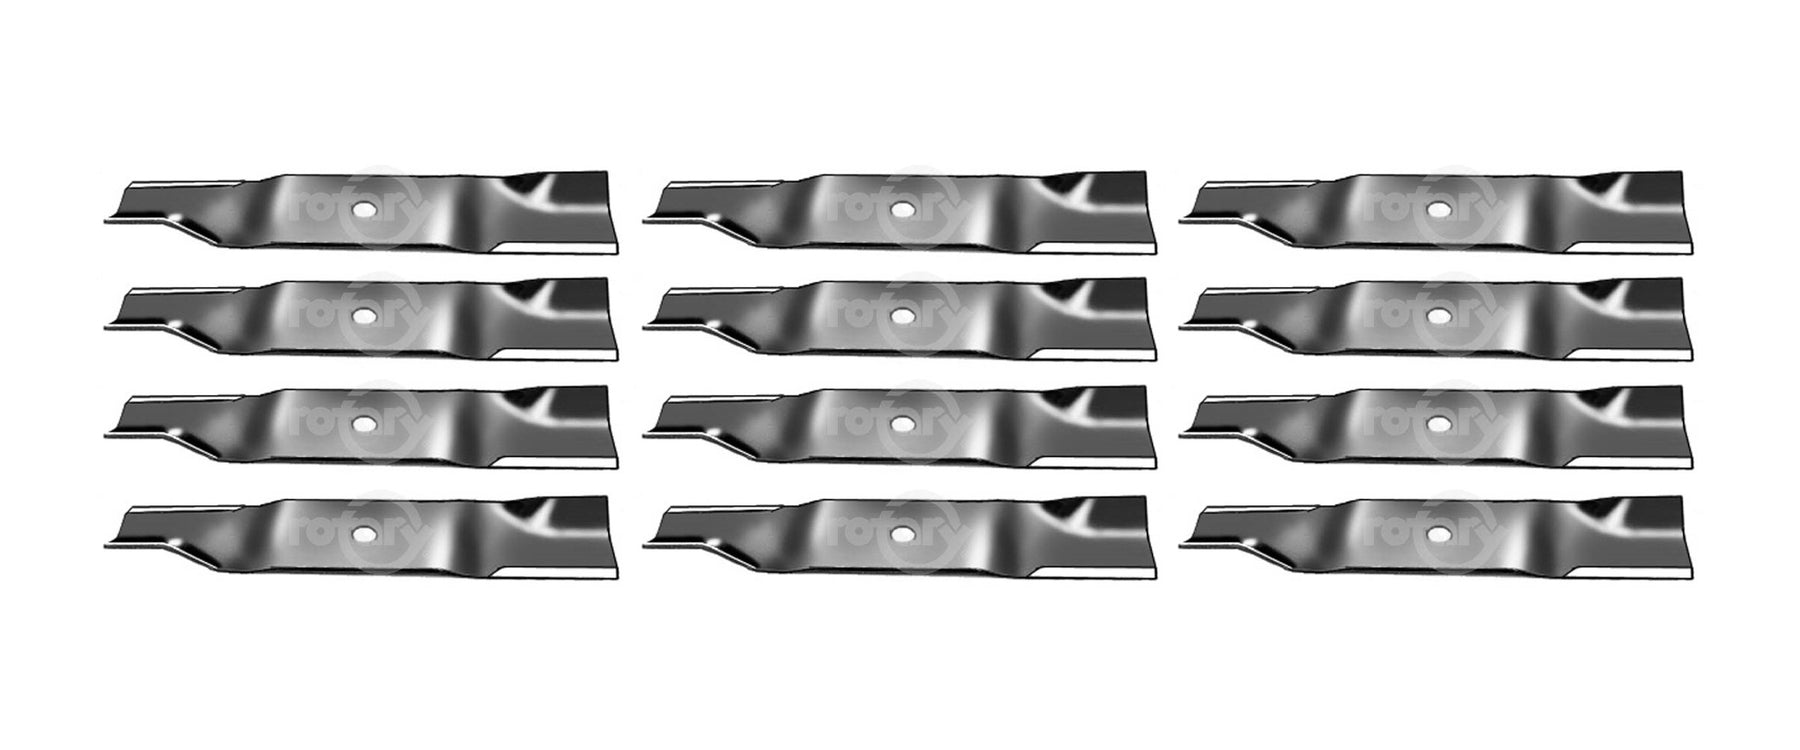 12 Pack Blades For Cub Cadet MTD 02005017 1005336 742-04417 942-04417 942-04417A